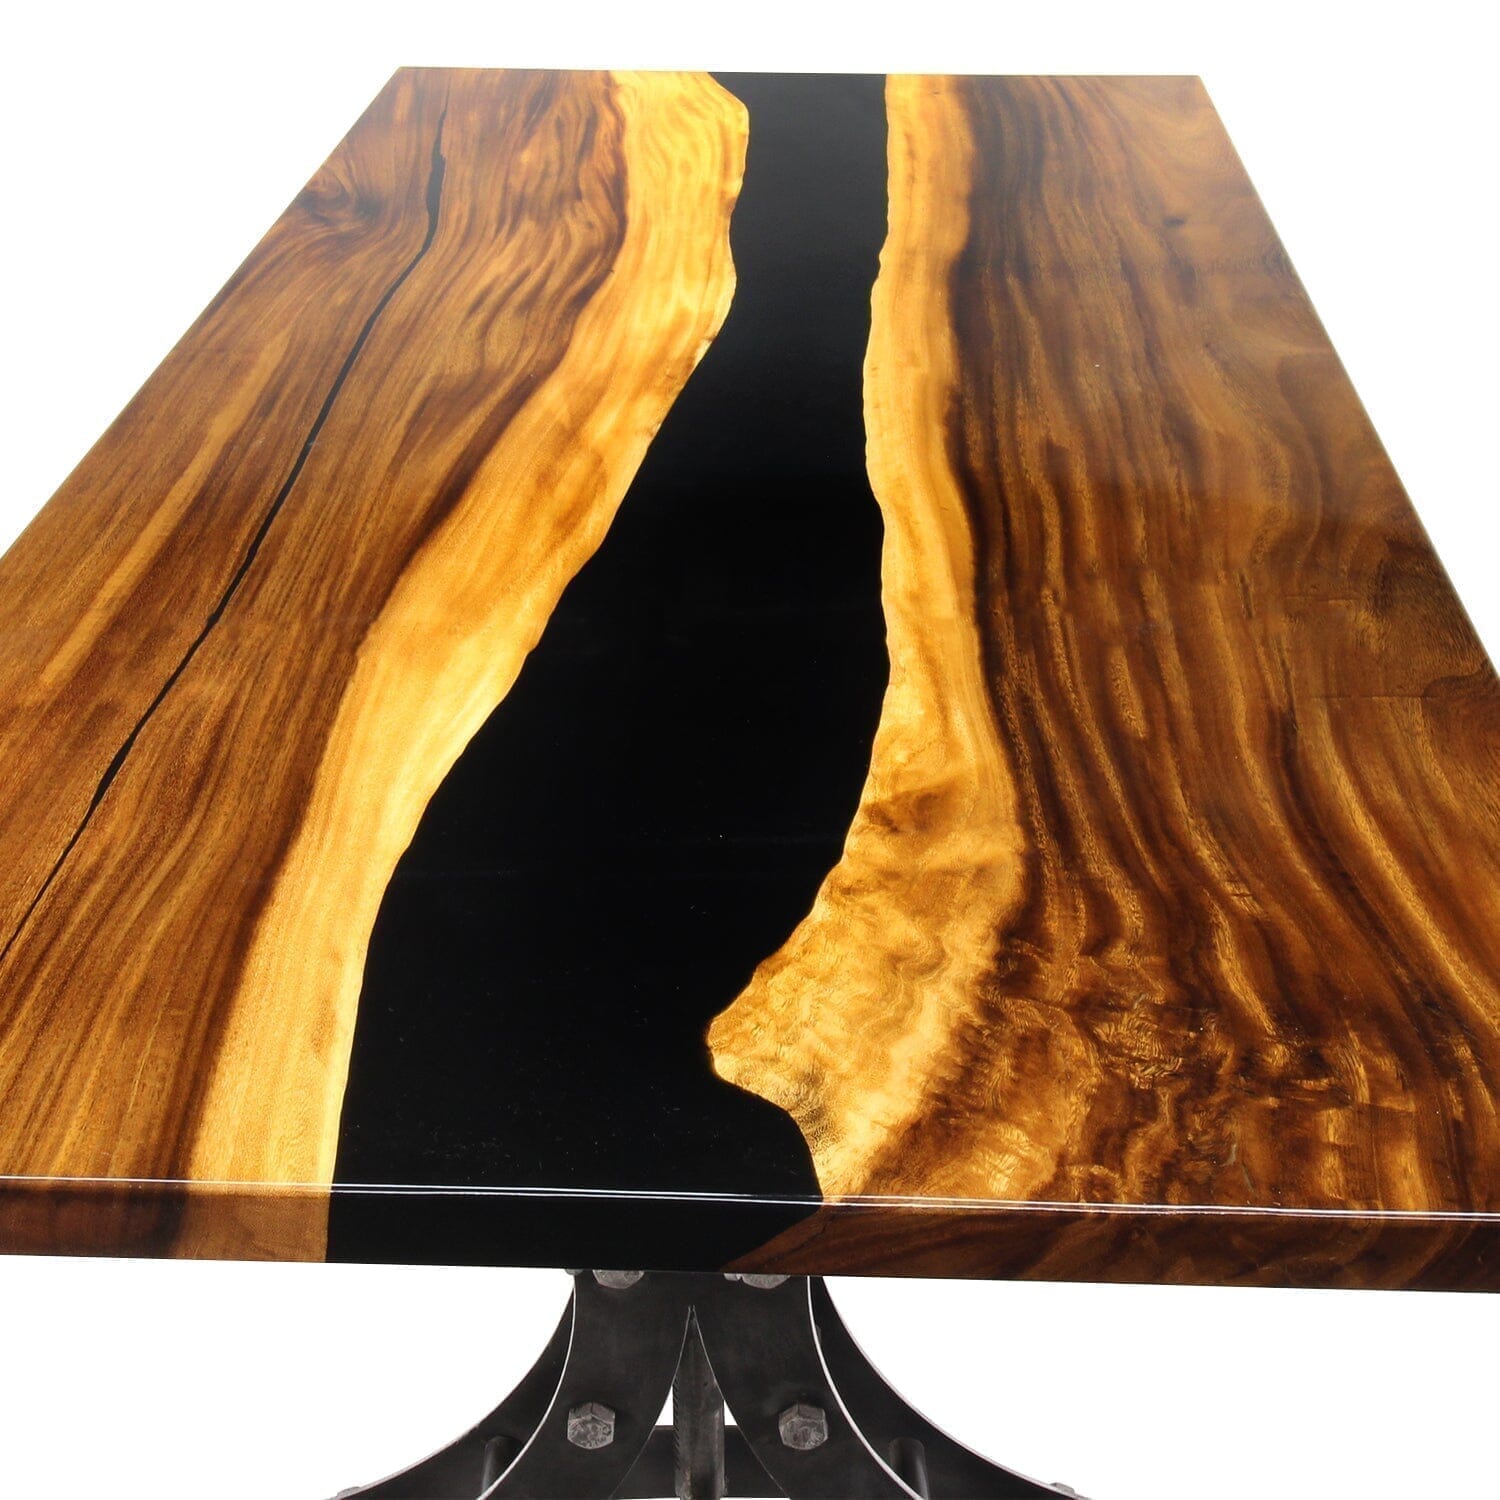 Oval walnut and black epoxy resin table O06L, Shipping 1-2 day